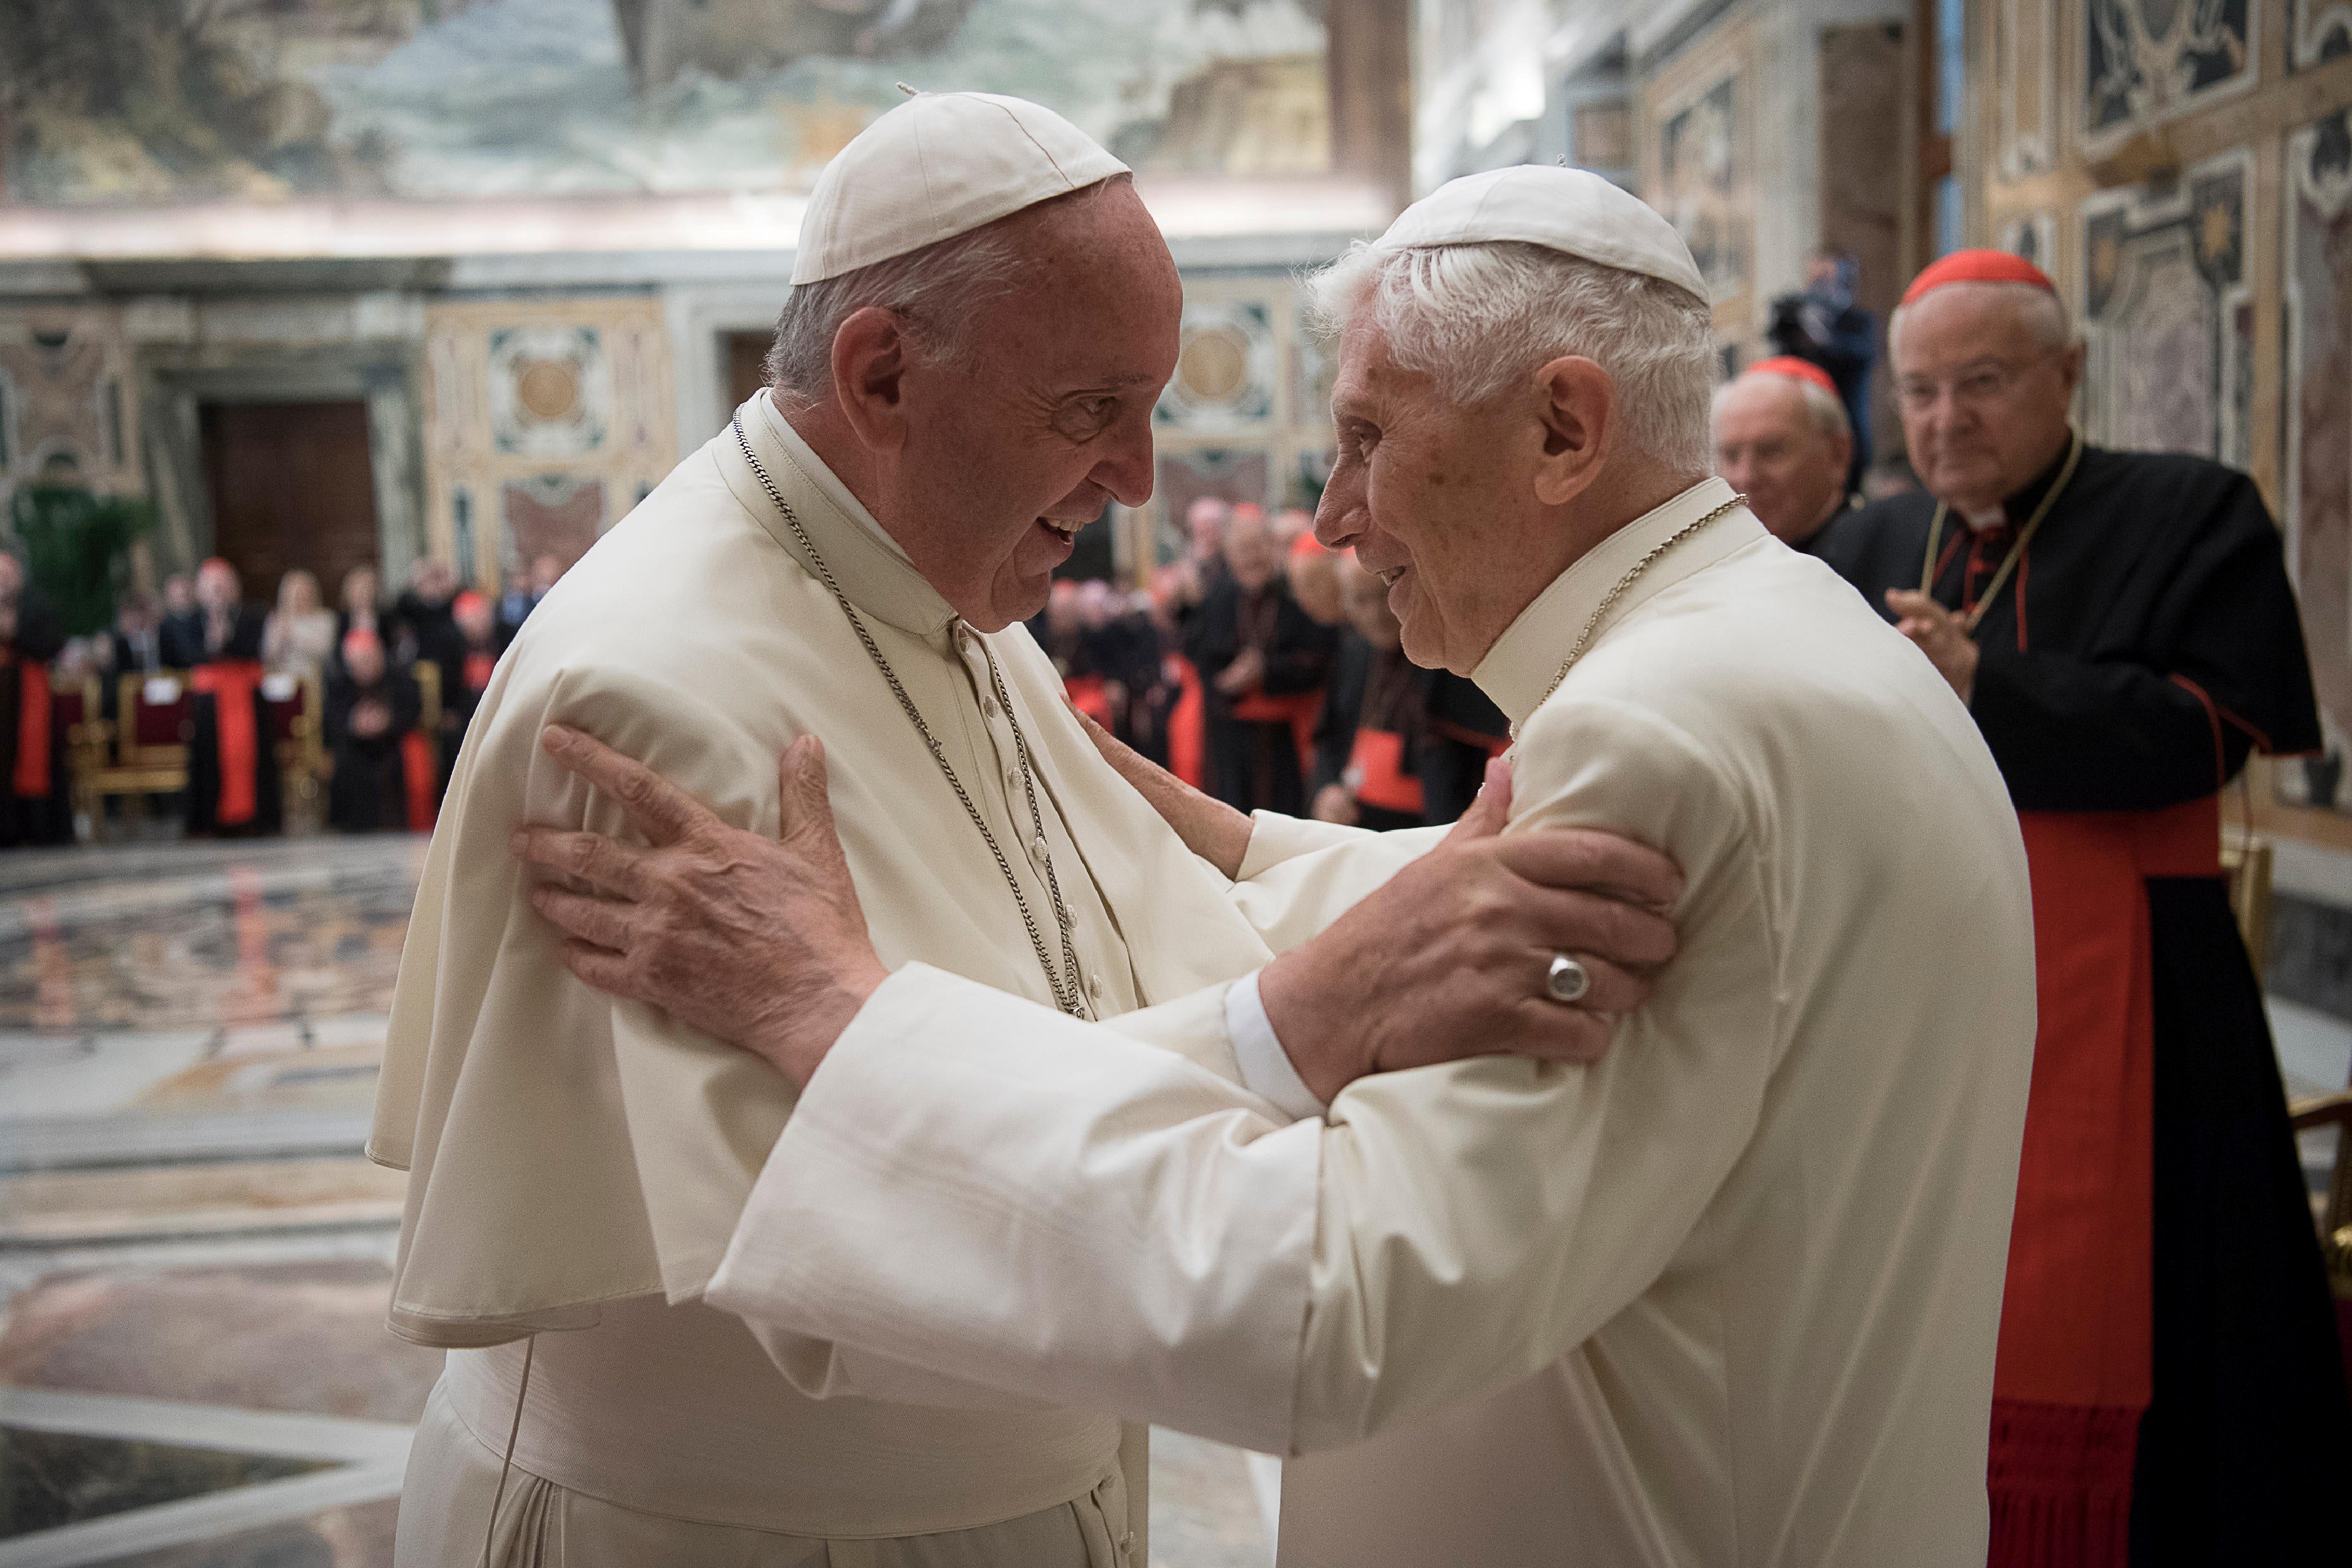 The two popes embrace.